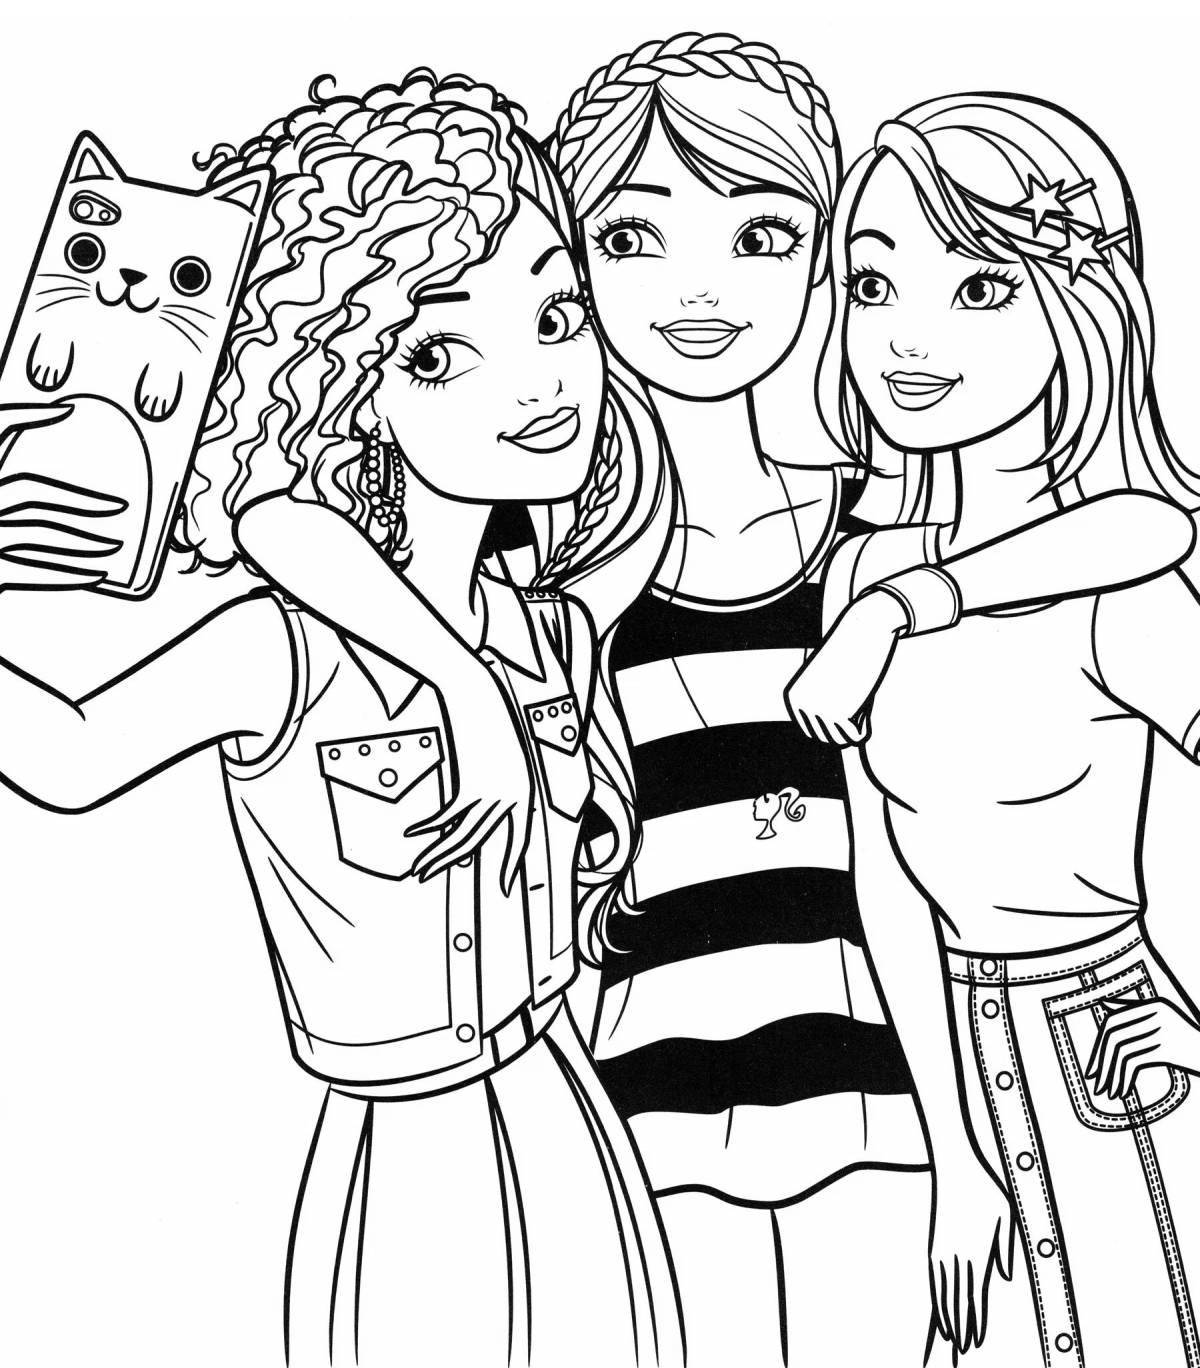 Awesome 14 year old charm coloring book